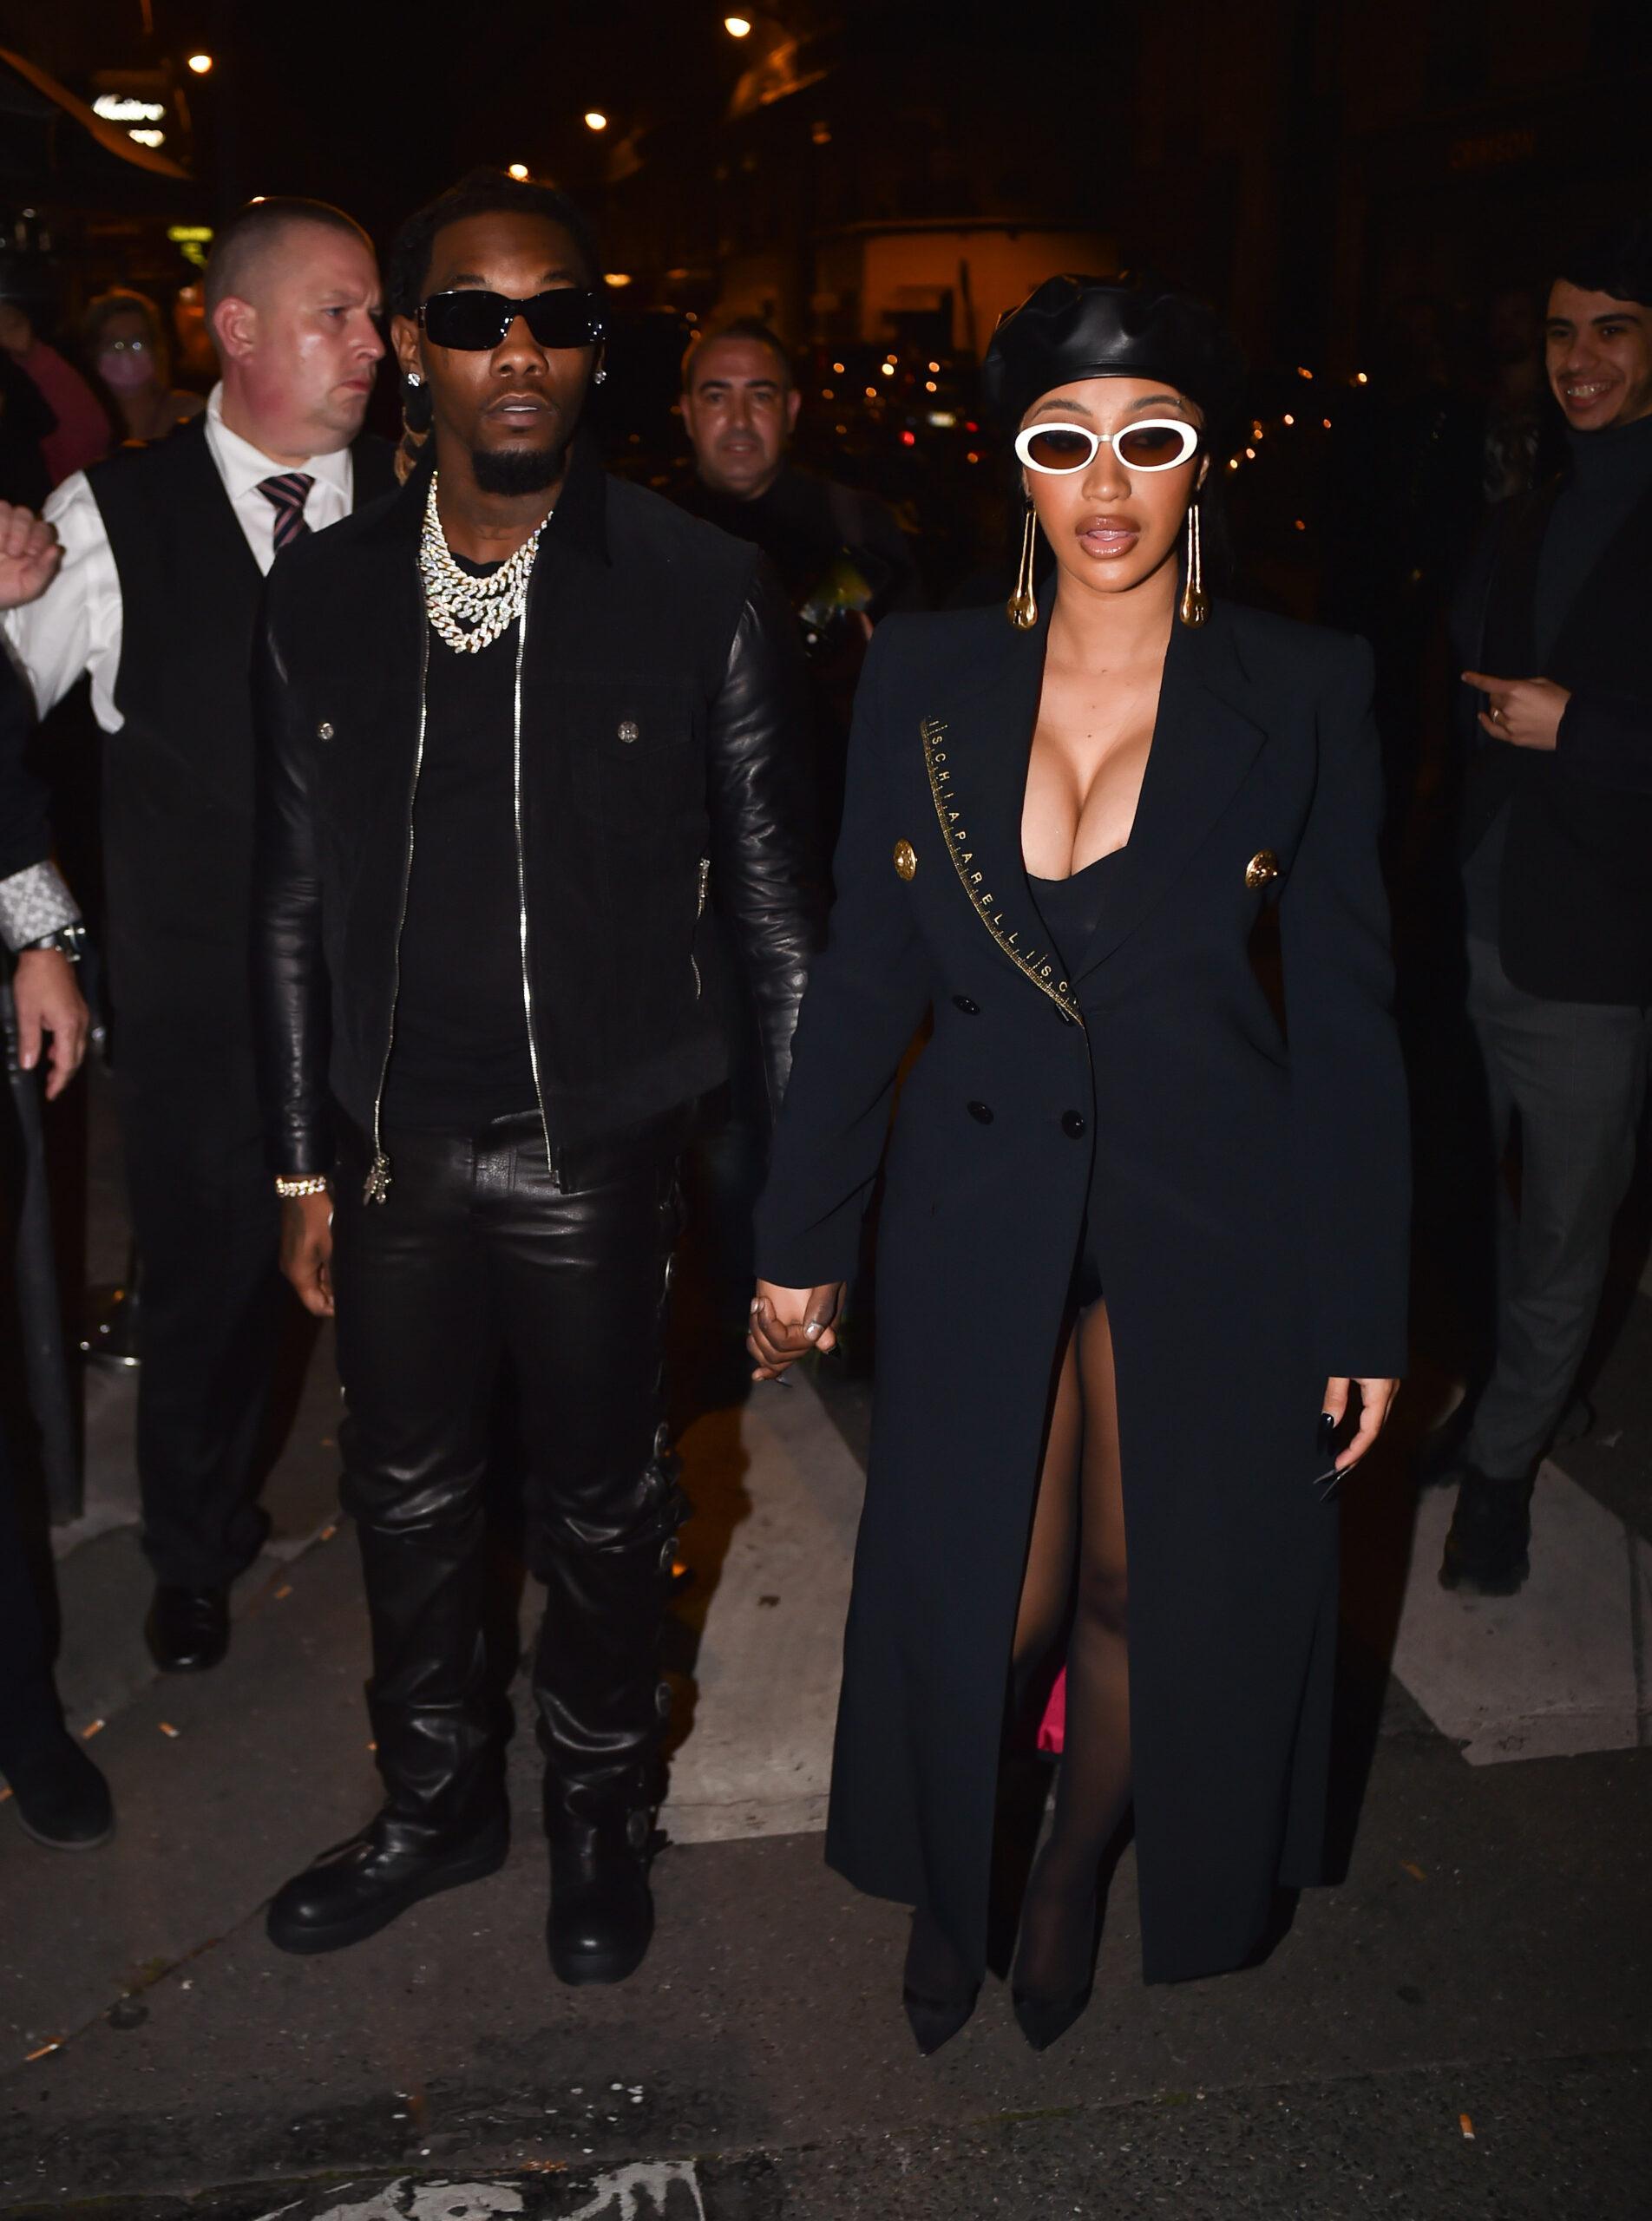 Cardi B is seen with boyfriend Offset at the Beef Bar opening party in Paris